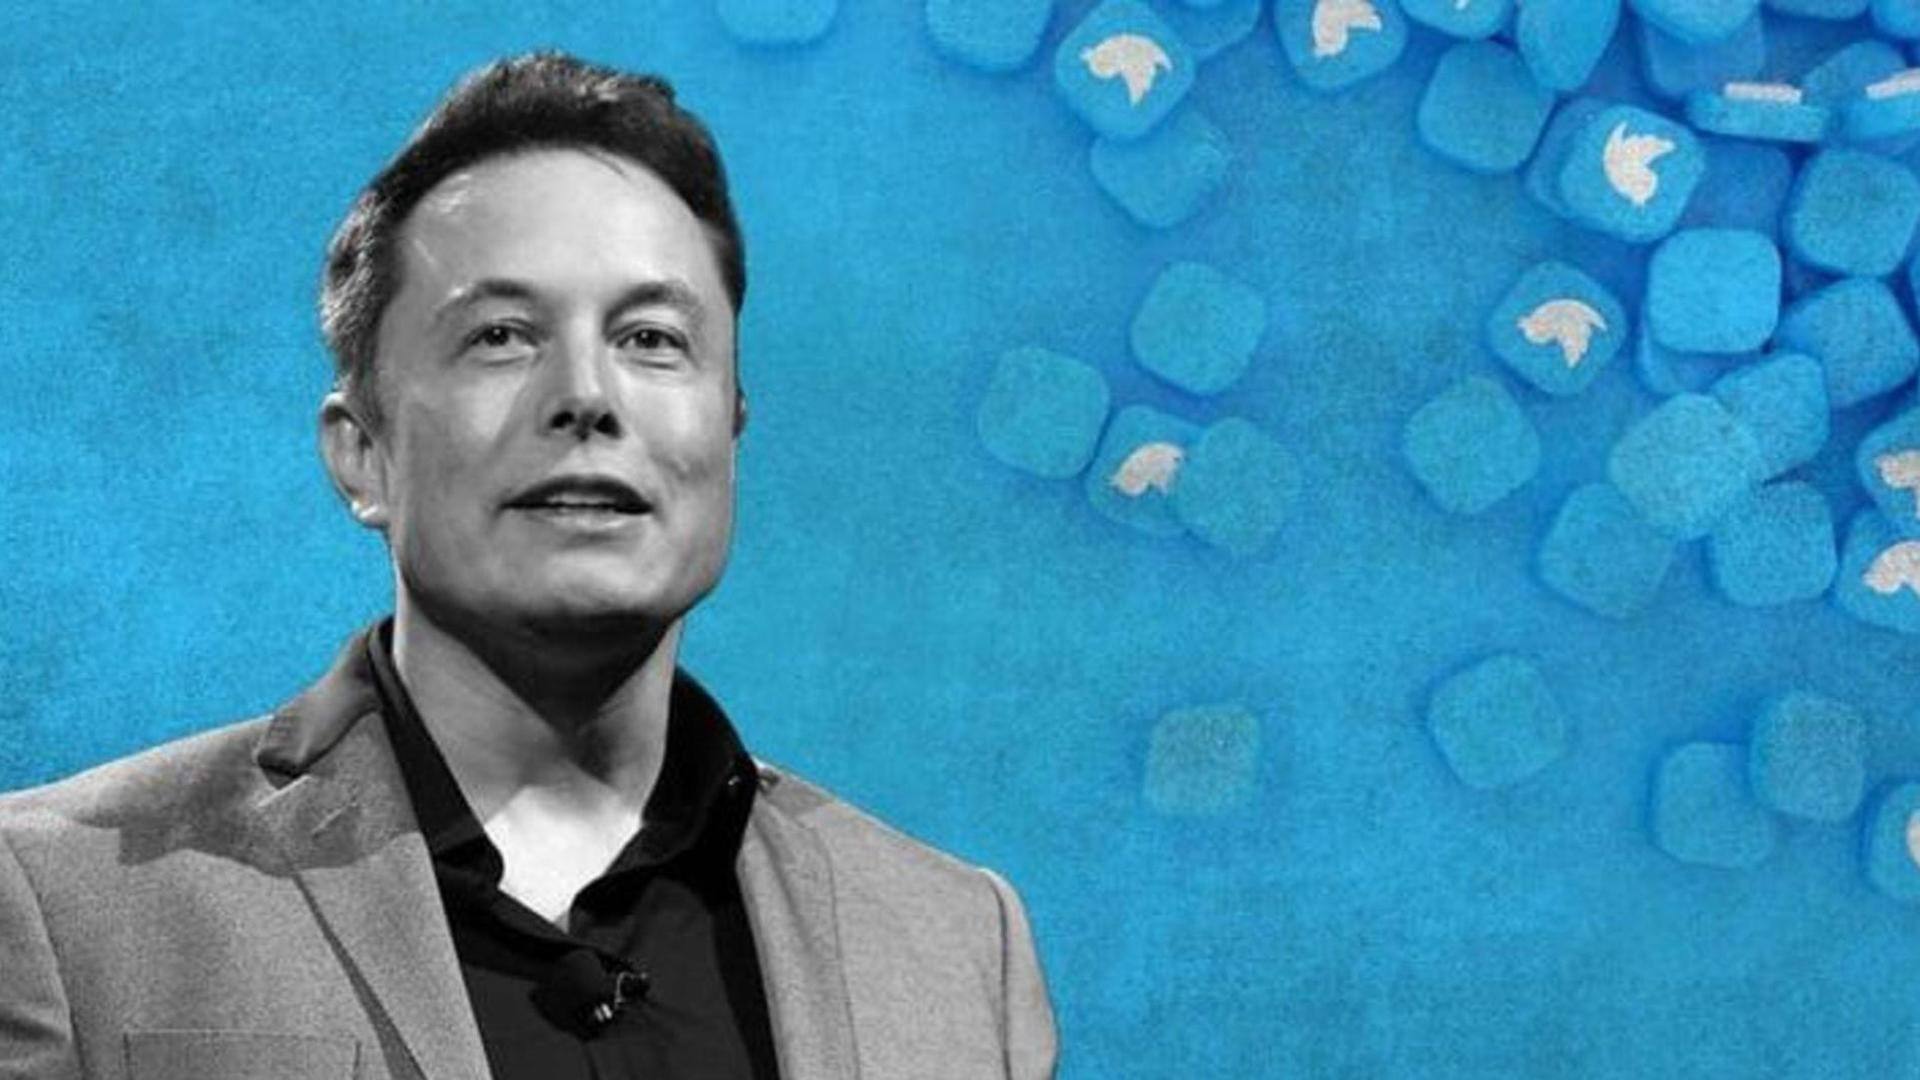 Musk announces new Twitter features: 10k characters, encryption, emoji reactions